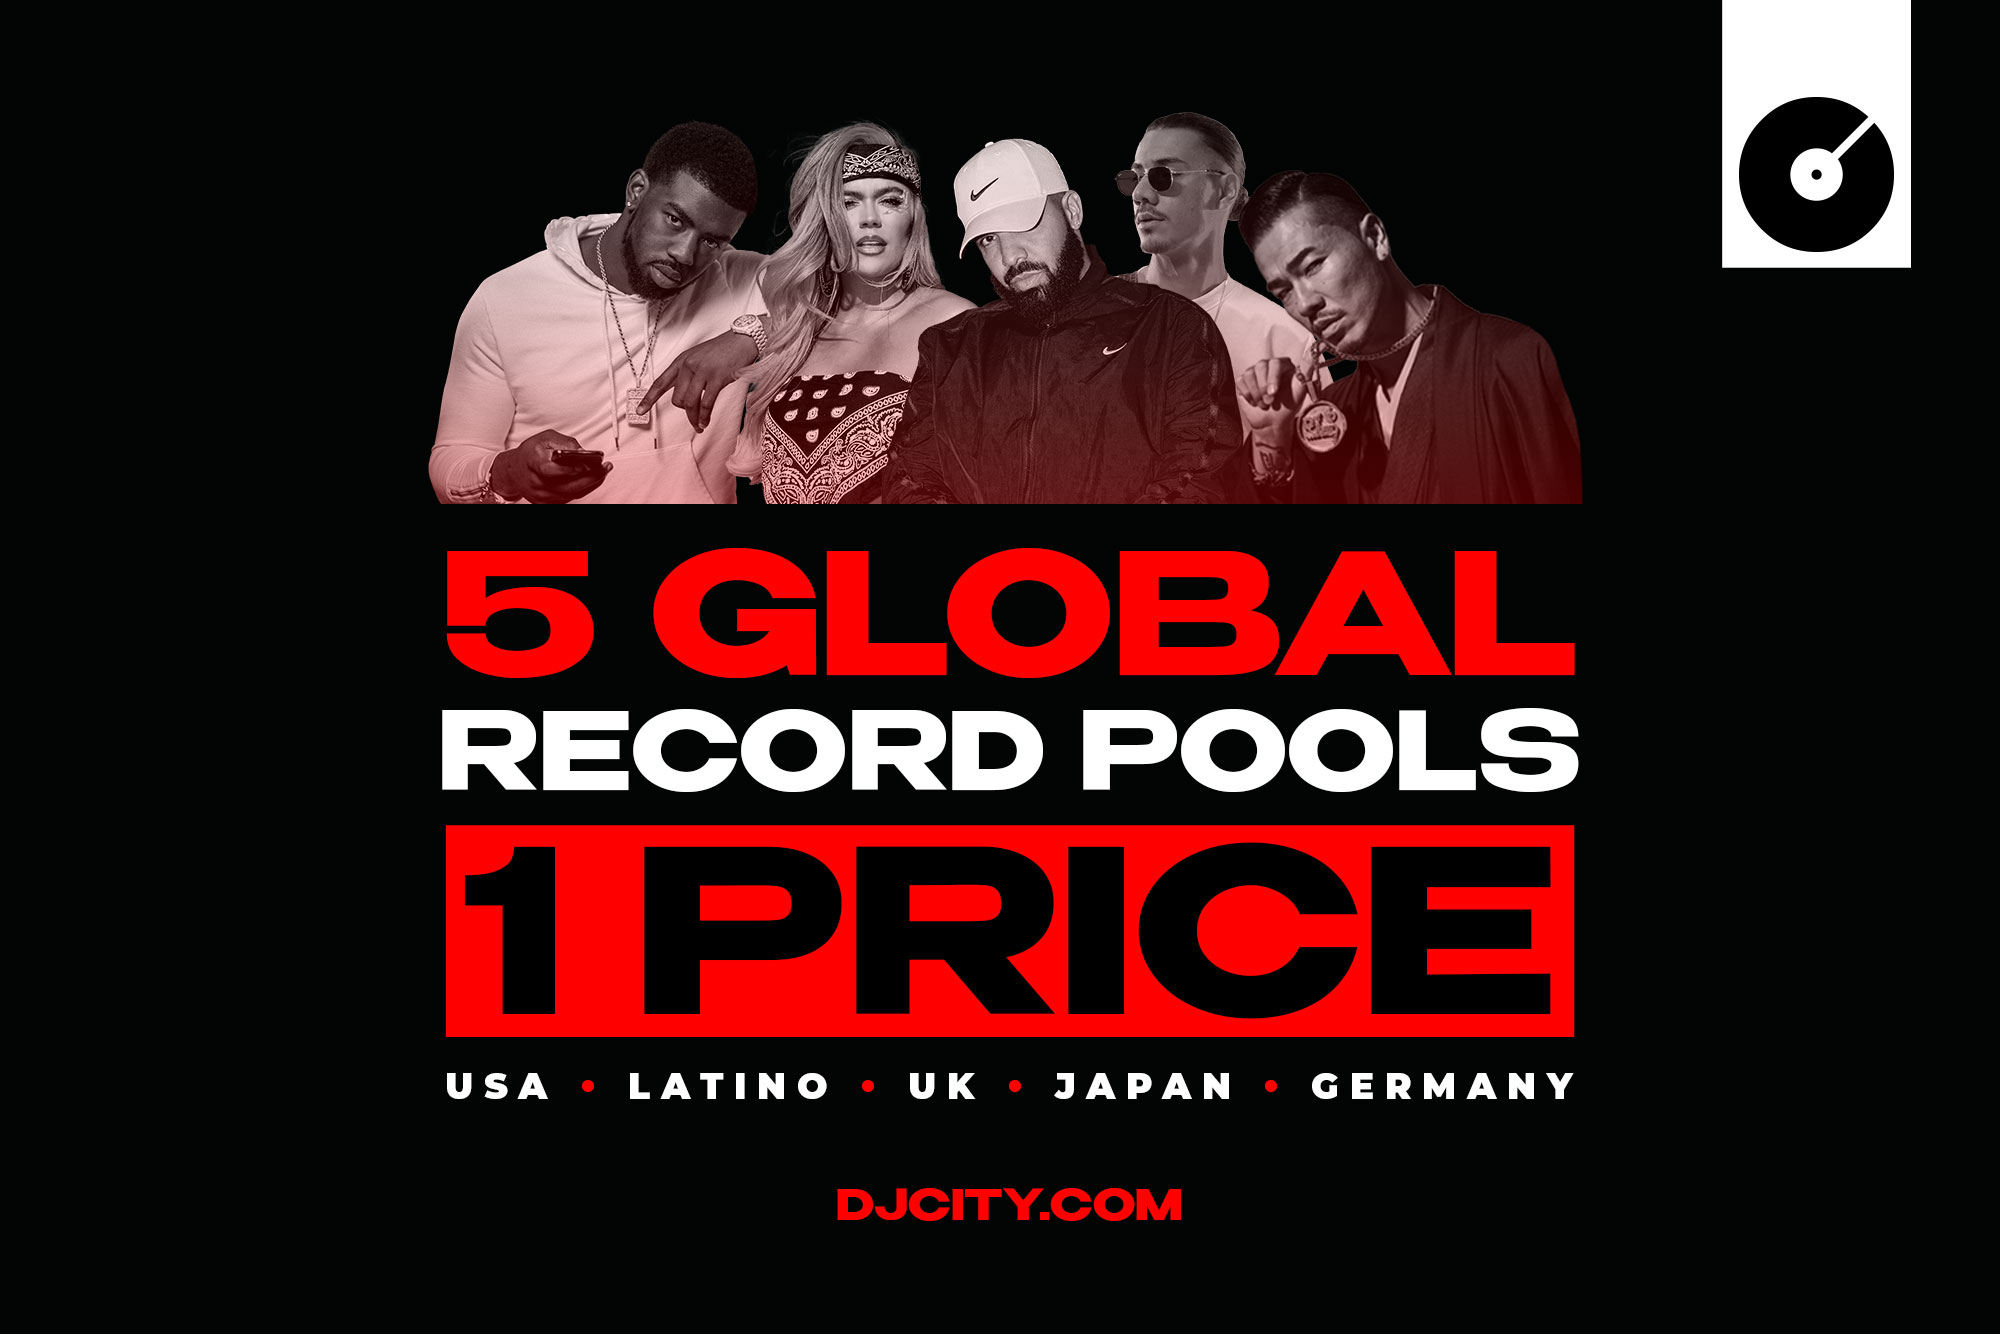 Get Five Record Pools for the Price of One With DJcity's New Global Music Page